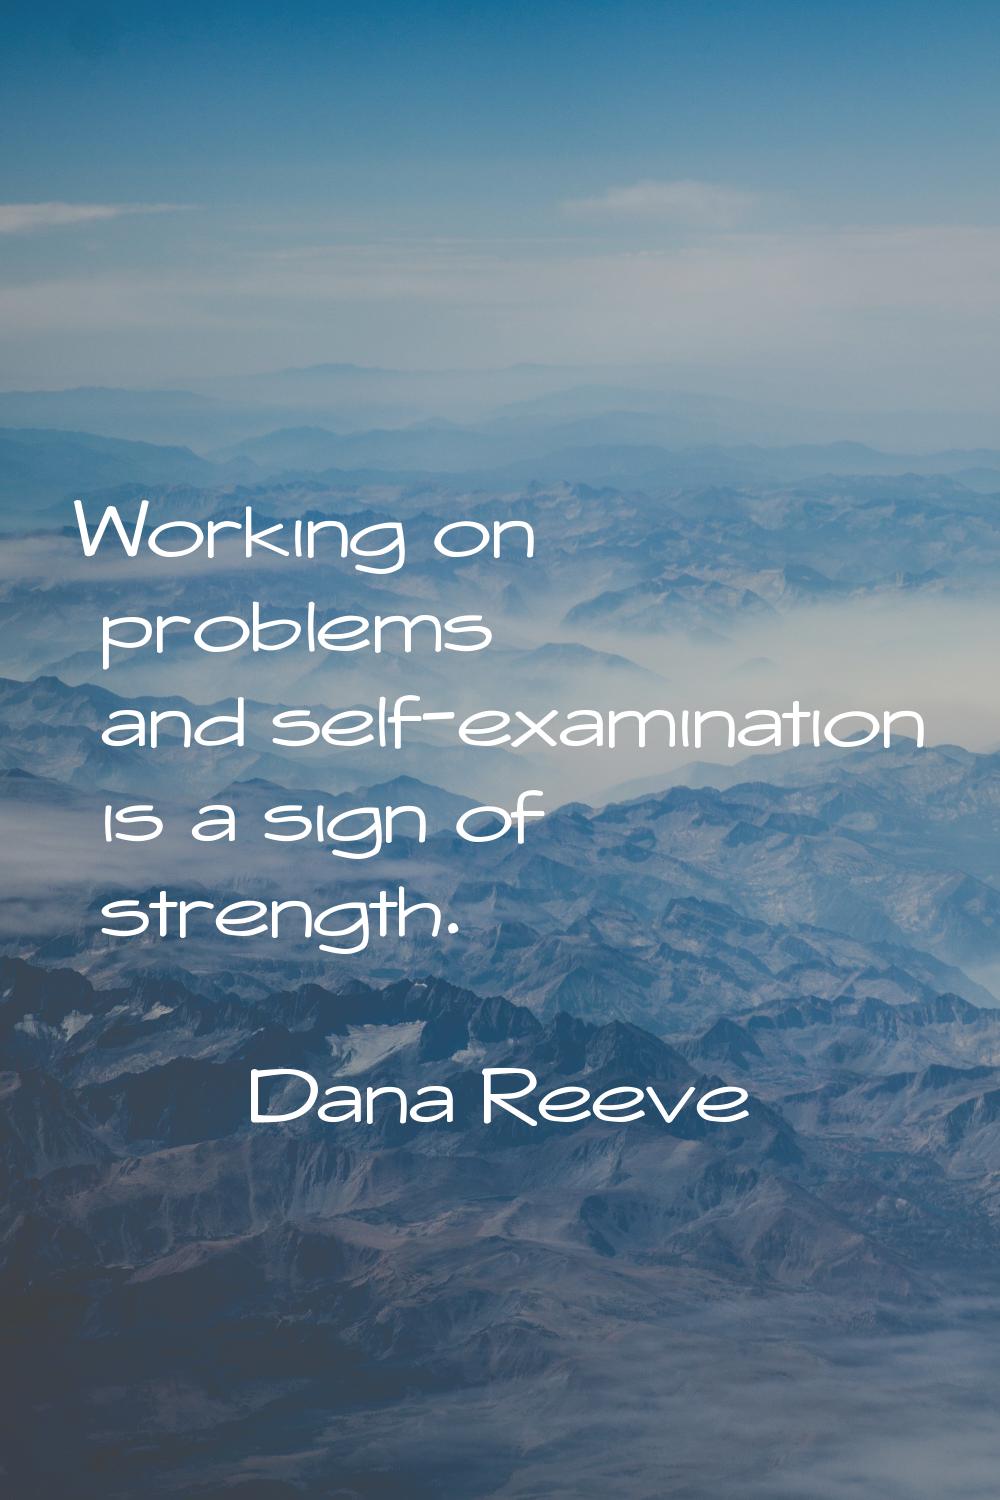 Working on problems and self-examination is a sign of strength.